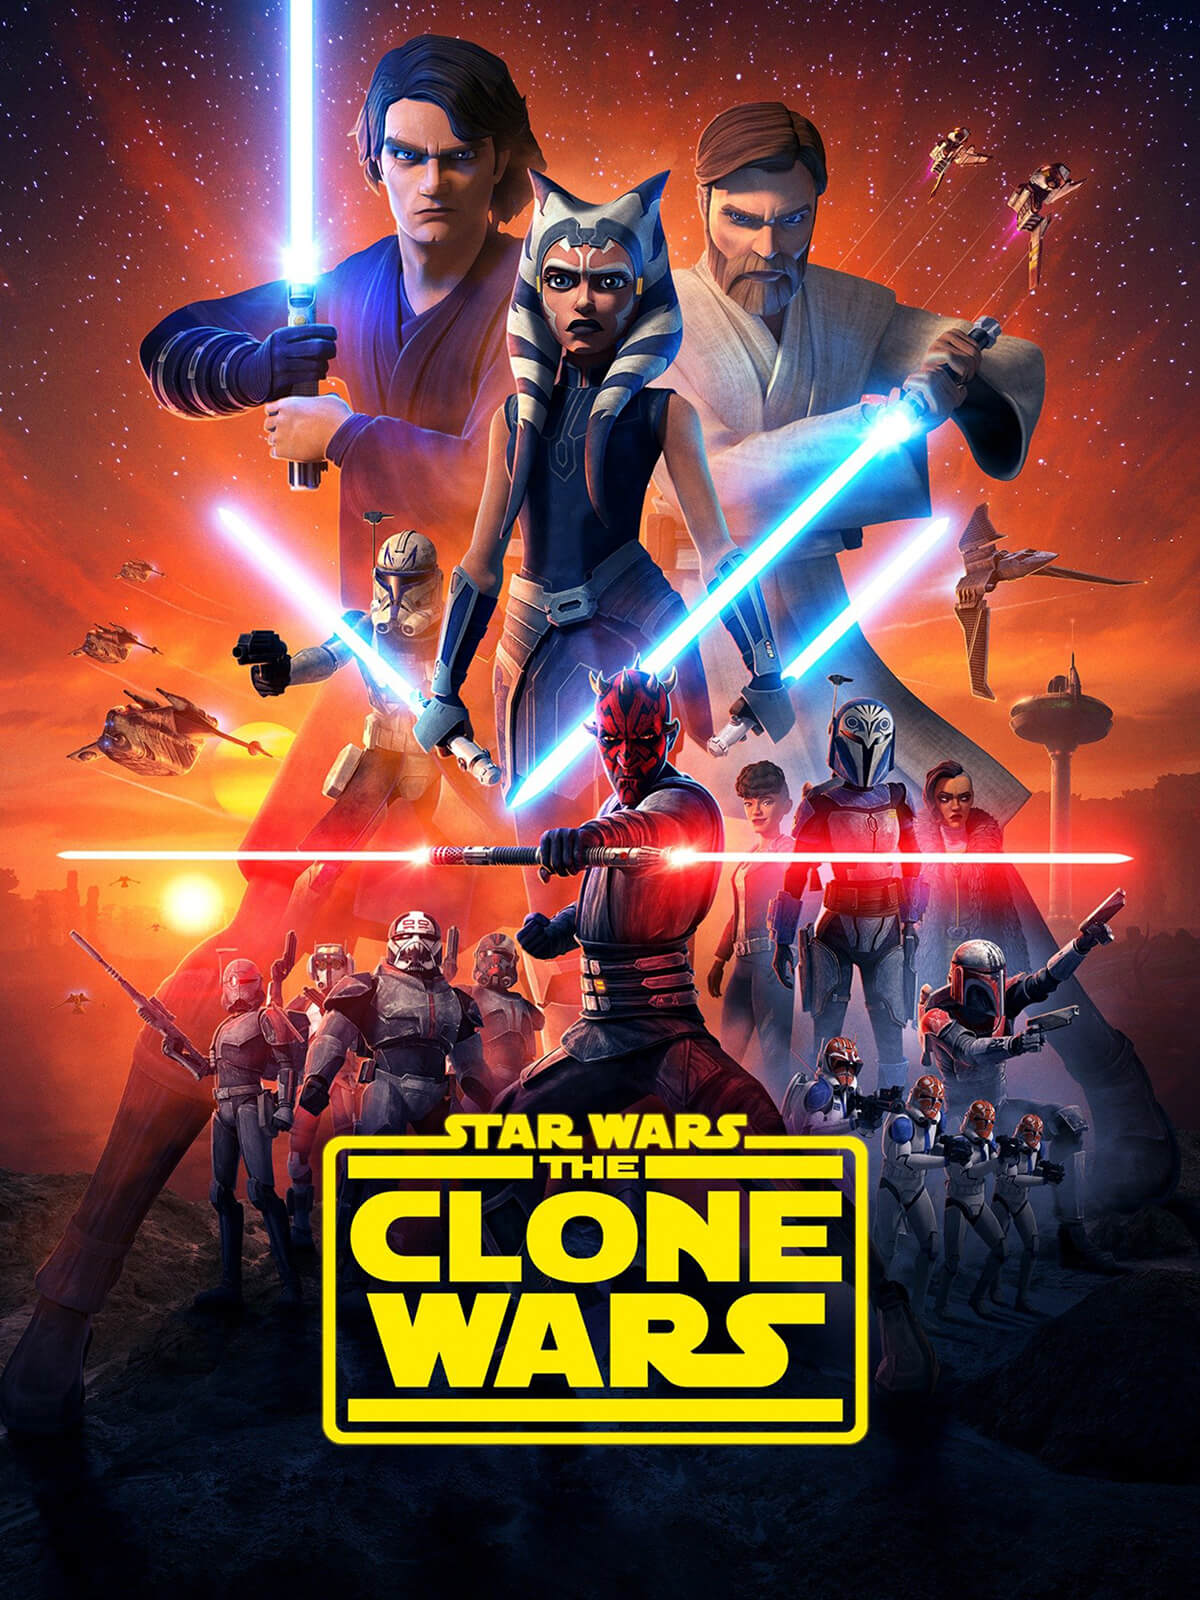 A promo image displaying the cast of characters from the Star Wars: The Clone Wars animated series.